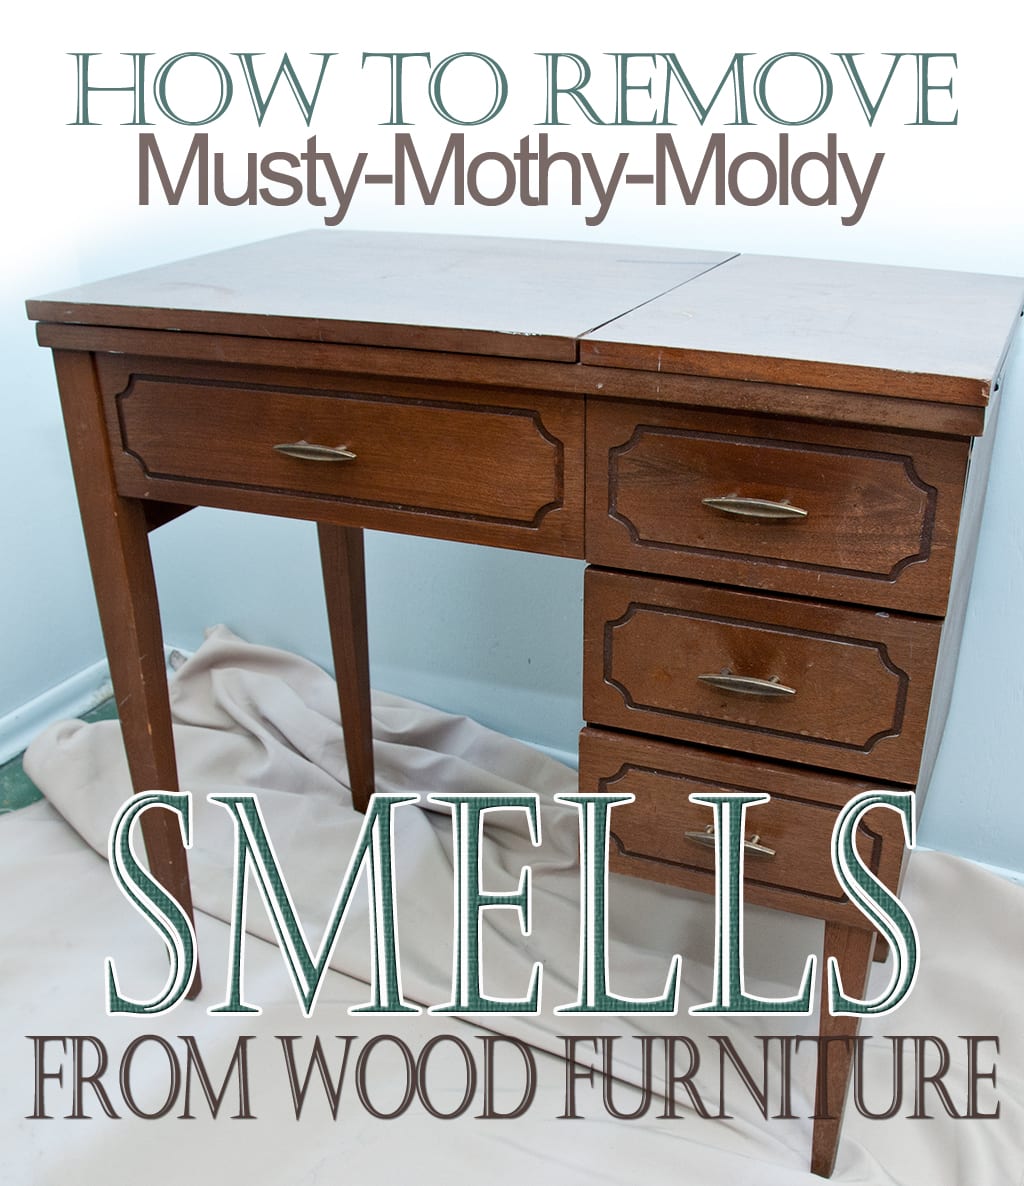 What causes musty smells in a basement?